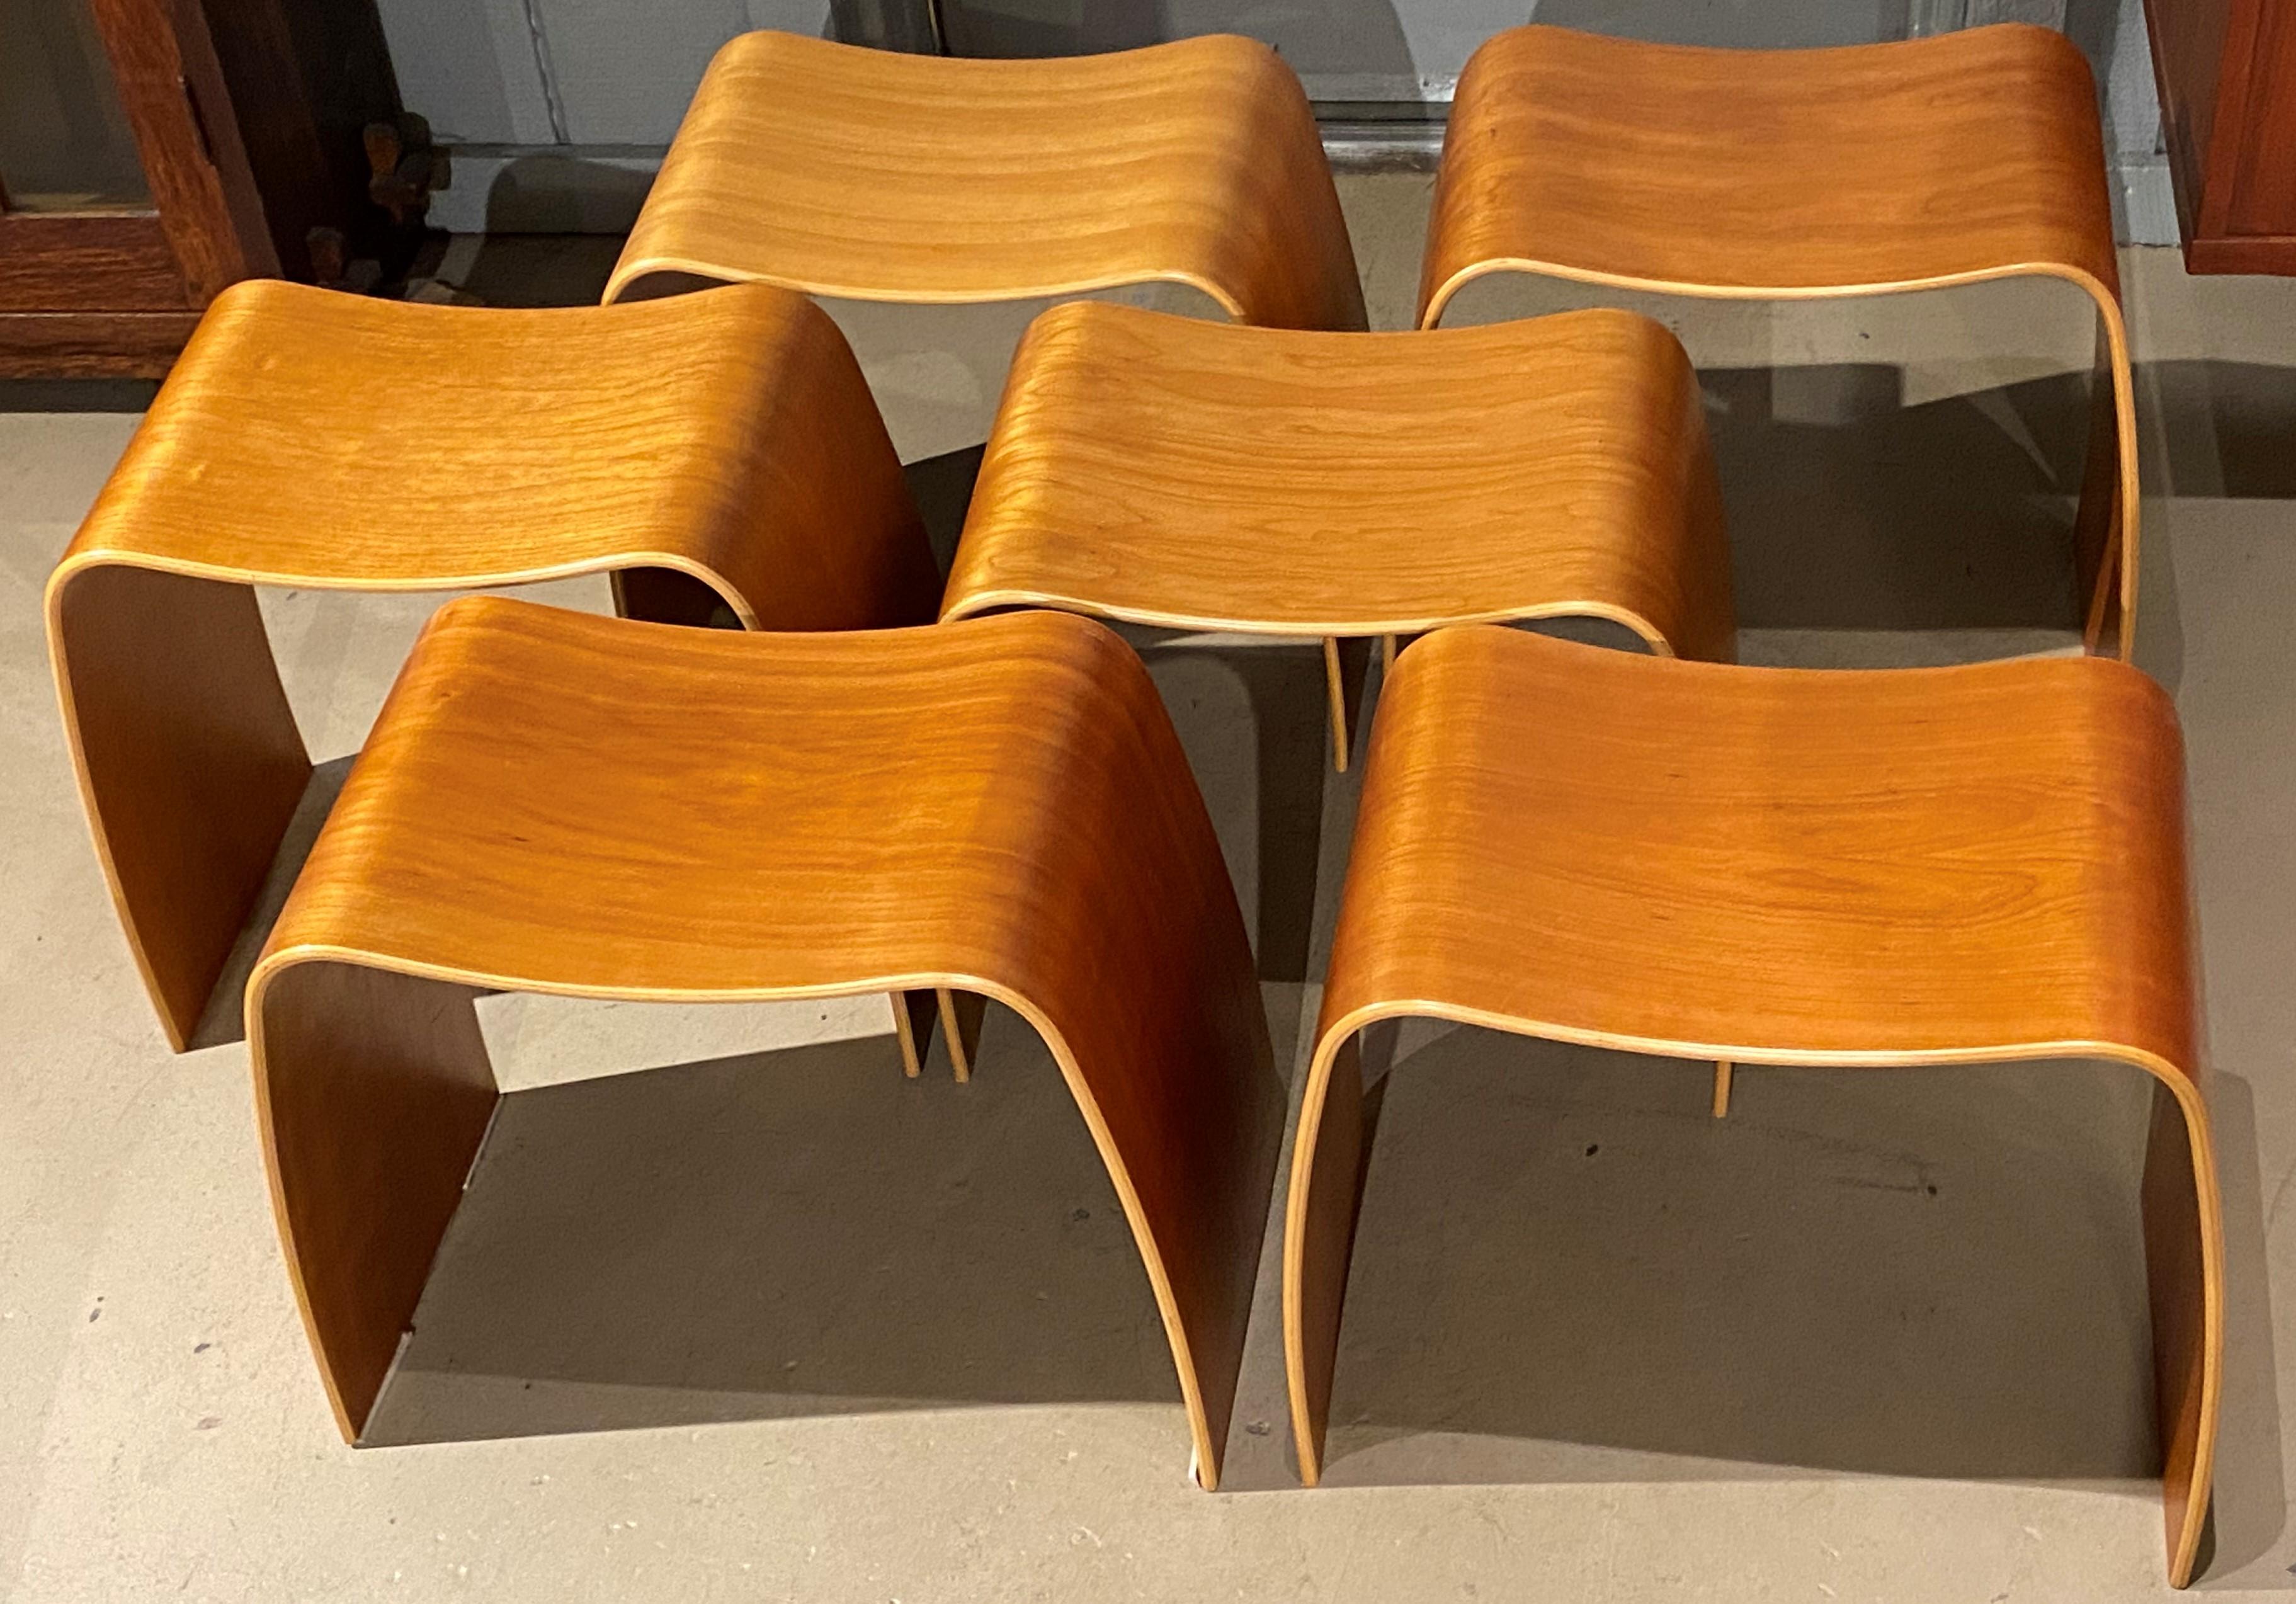 A fine set of six Danish Modern cherry veneer bentwood stacking Taburet M stools designed by Jørgen Møller (1930-2009) for Askman Wood & Furniture, with labels found on the underside of the stools. The set dates to the late 20th century and is in